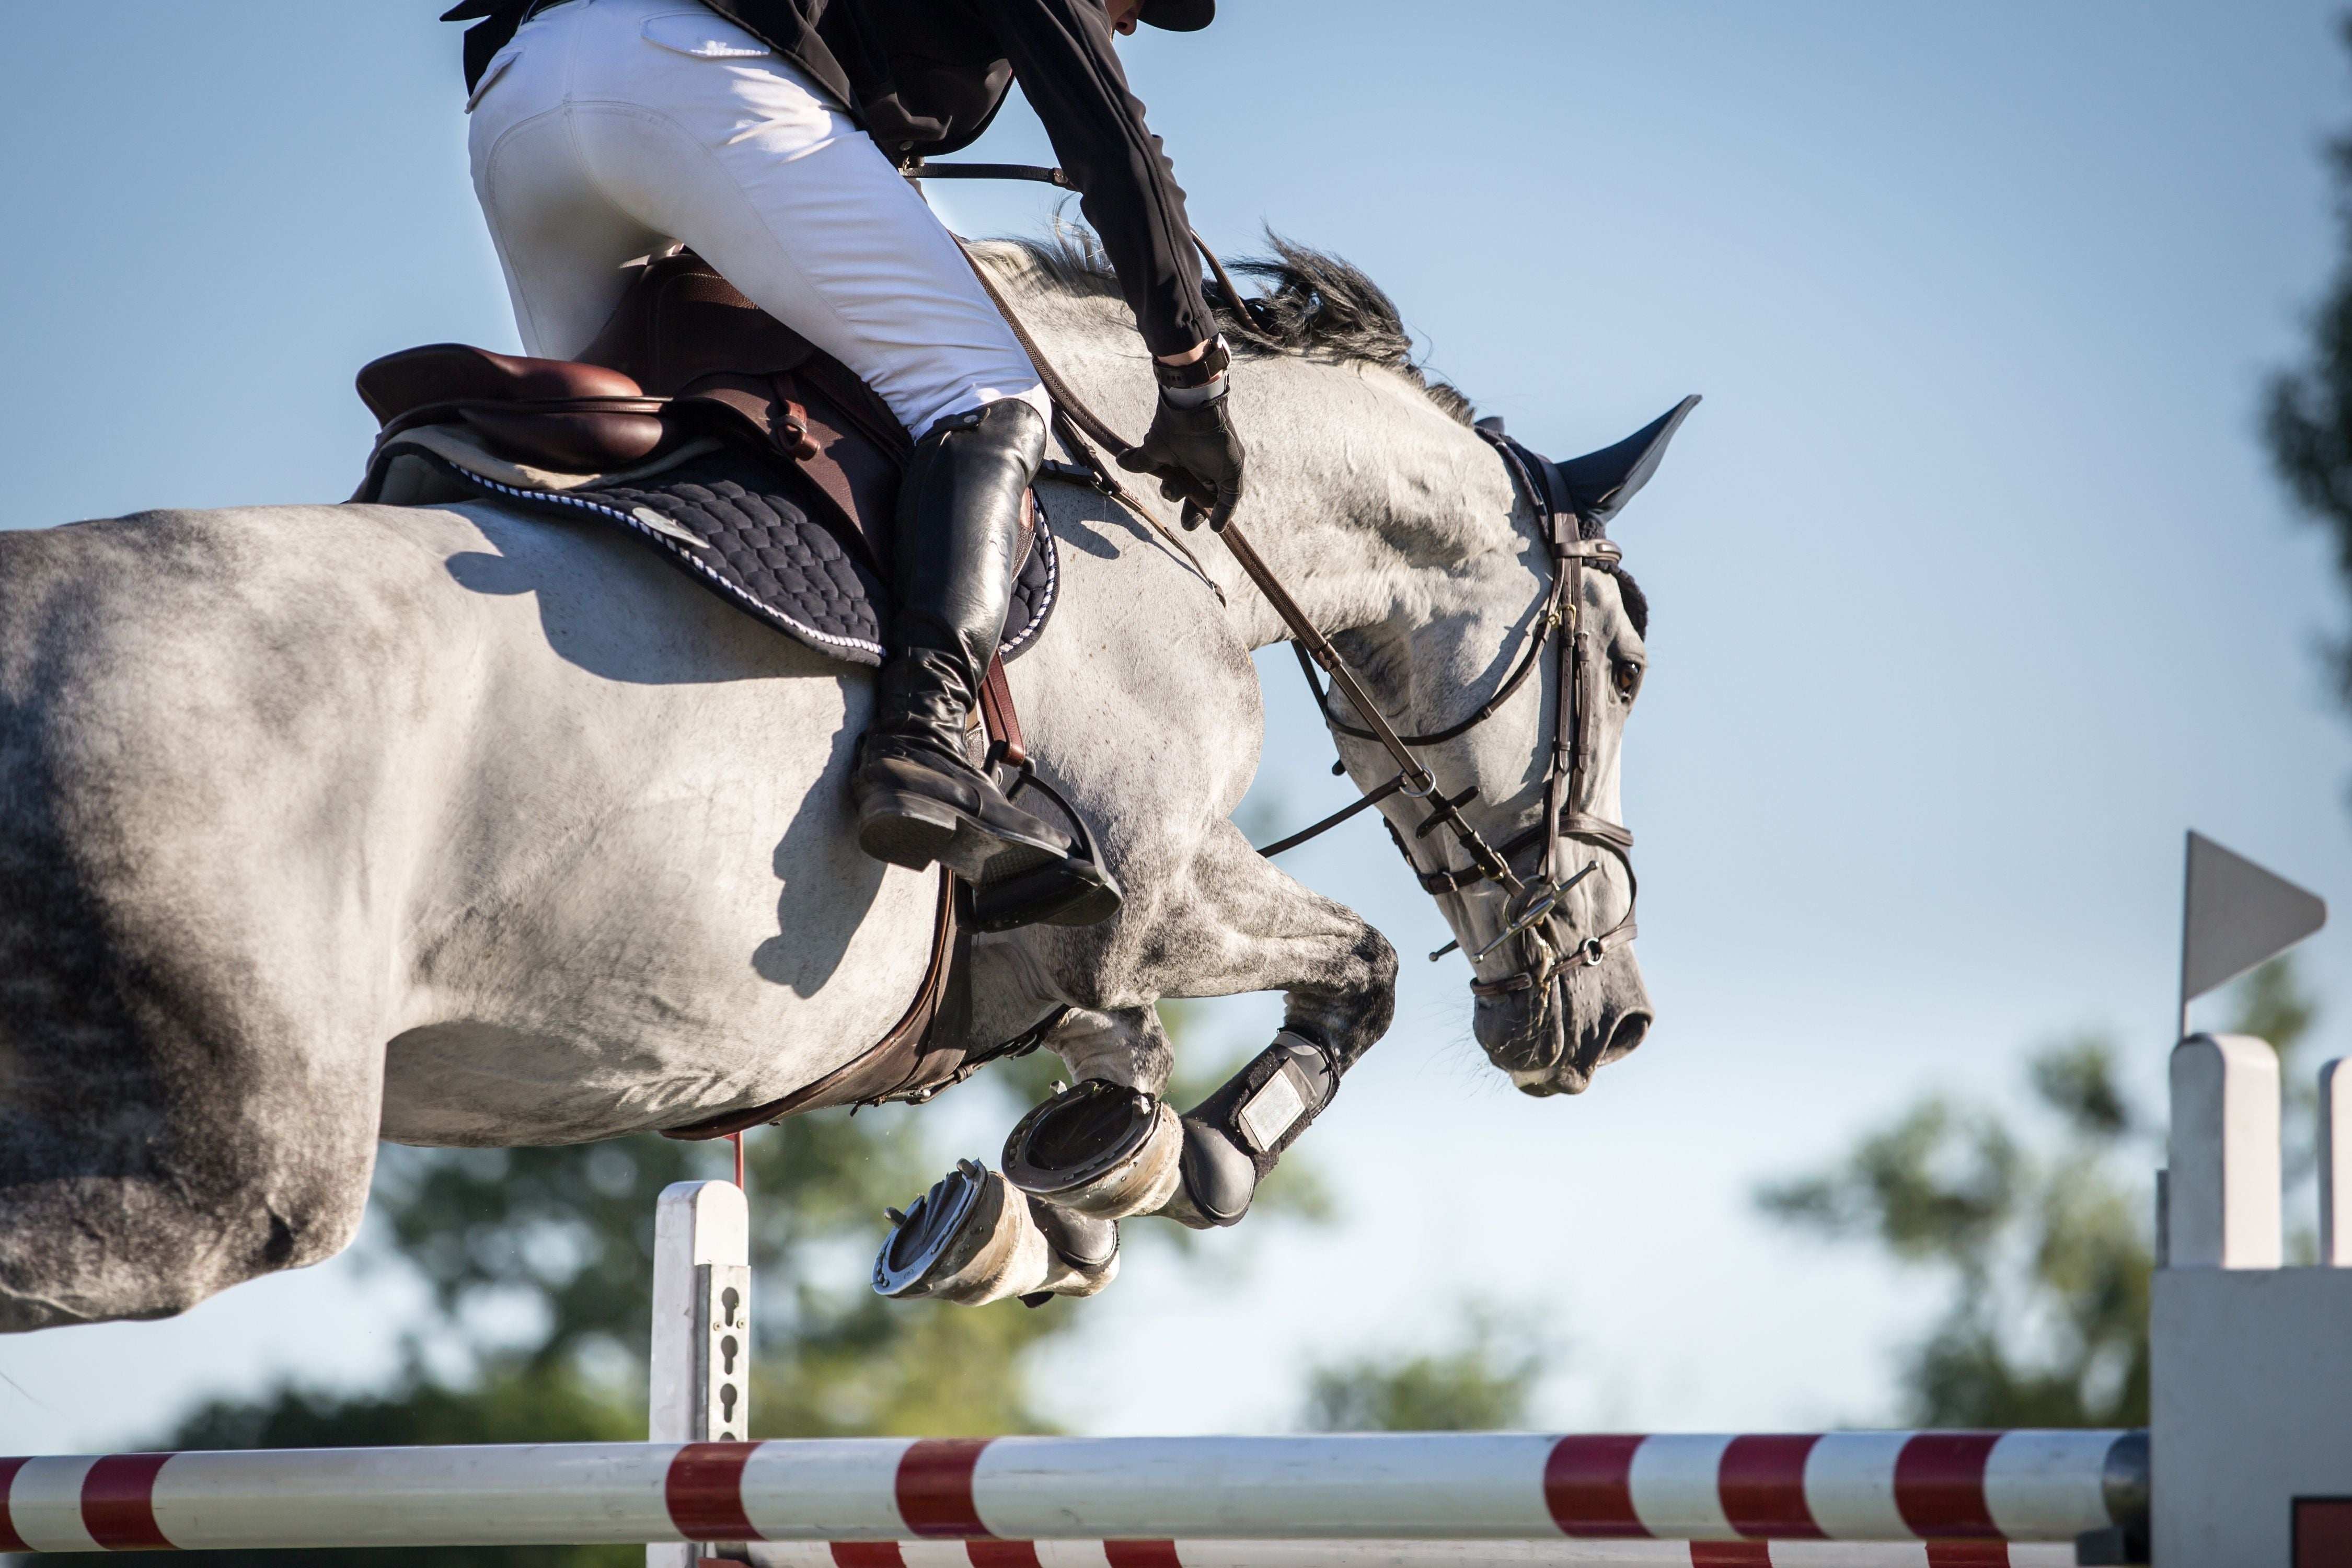 'For one to fly, one needs only to take the reins' : The World of Showjumping